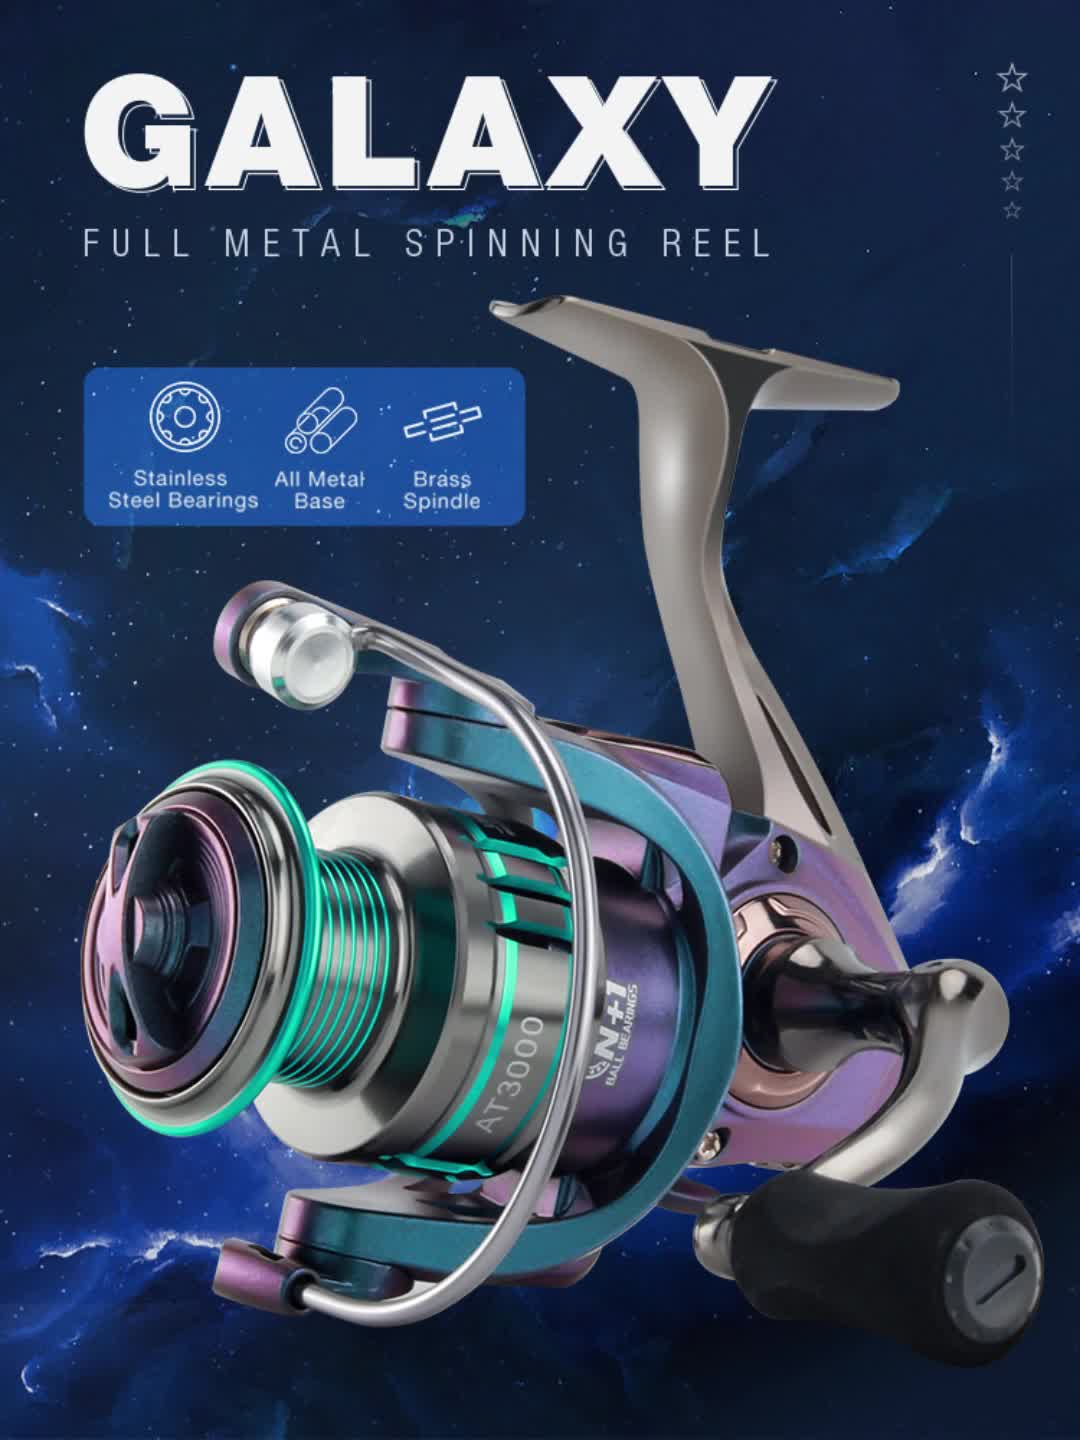 HAUT TON 1000/2000/3000/4000/5000/6000/7000 Spinning Fishing Reel 5.2:1  GearRatio,12+1BB,8-13Lbs ,For Saltwater Freshwater Fish